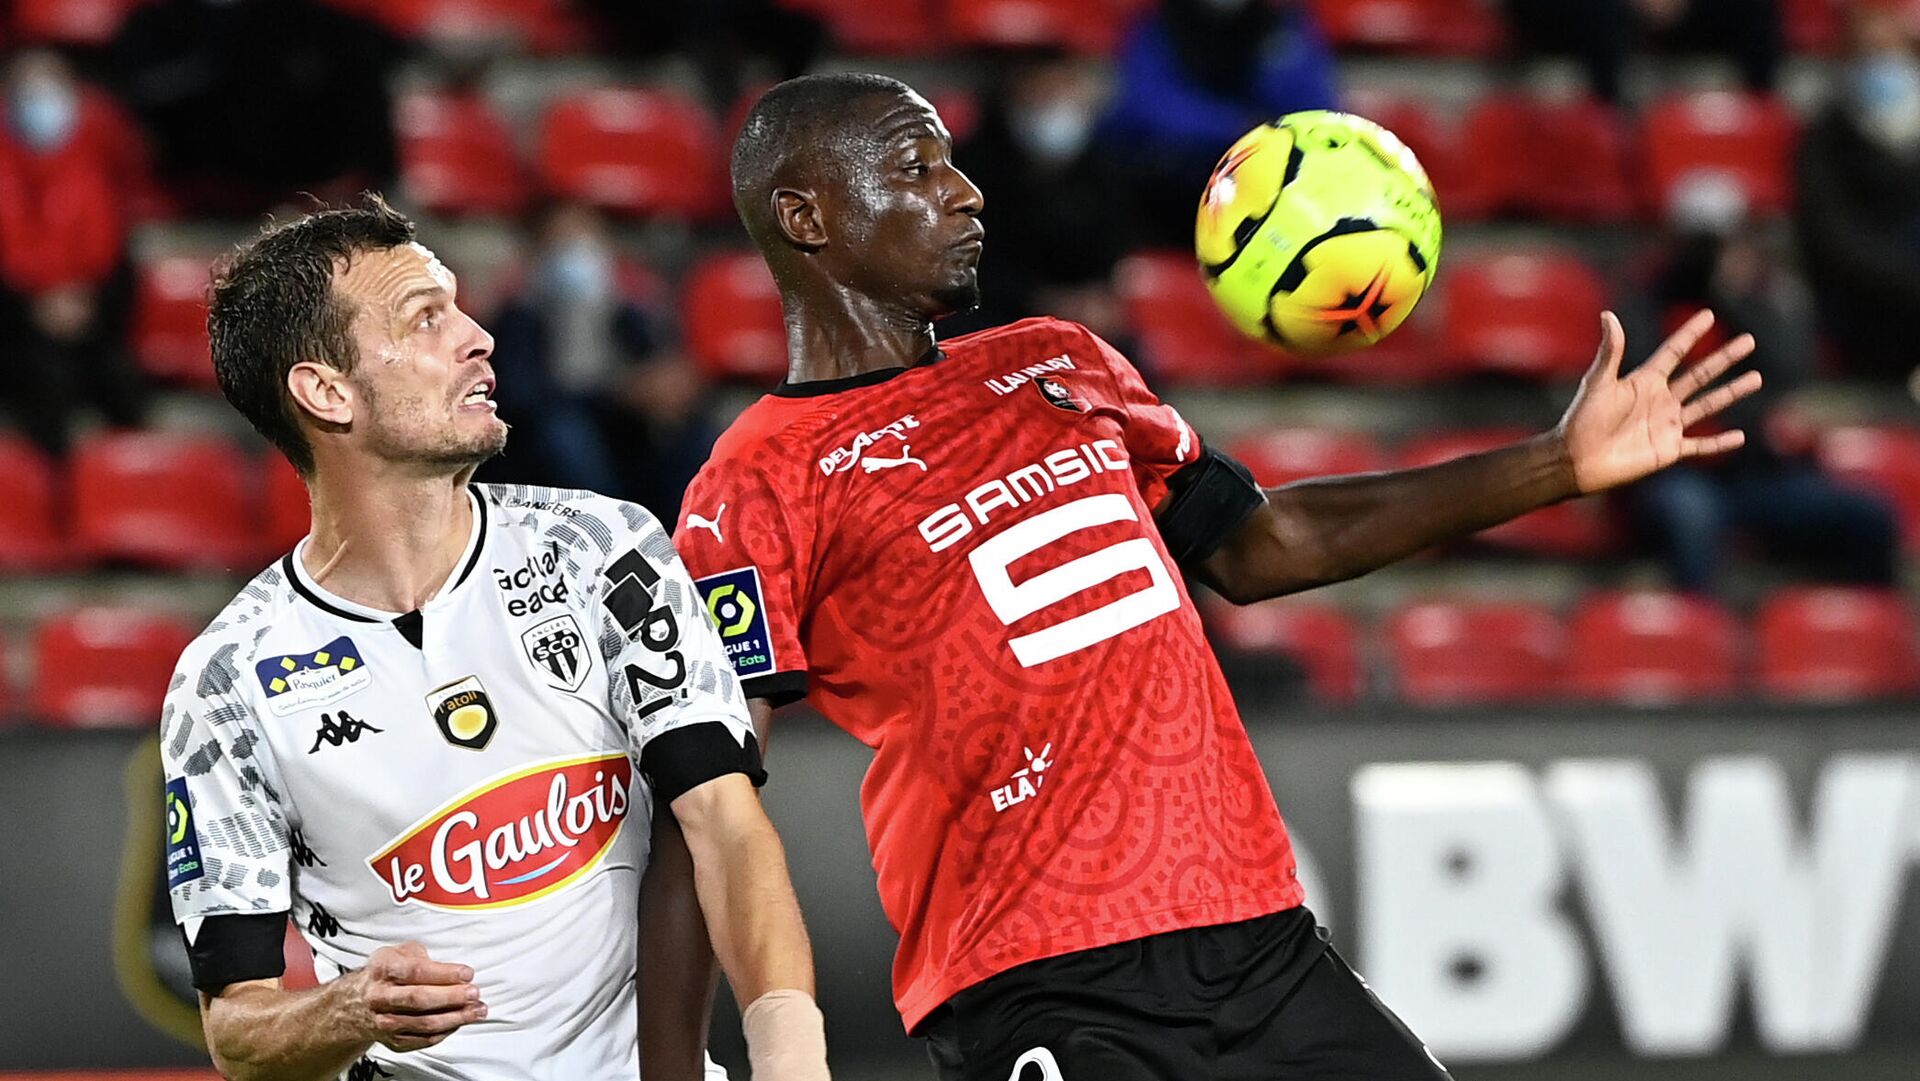 Stade Rennais' French forward Serhou Guirassy (R) vies with Angers' French defender Romain Thomas during the French L1 football match between Stade Rennais and Angers, at the Roazhon Park stadium in Rennes, northwestern France on October 23, 2020. (Photo by DAMIEN MEYER / AFP) - РИА Новости, 1920, 24.10.2020